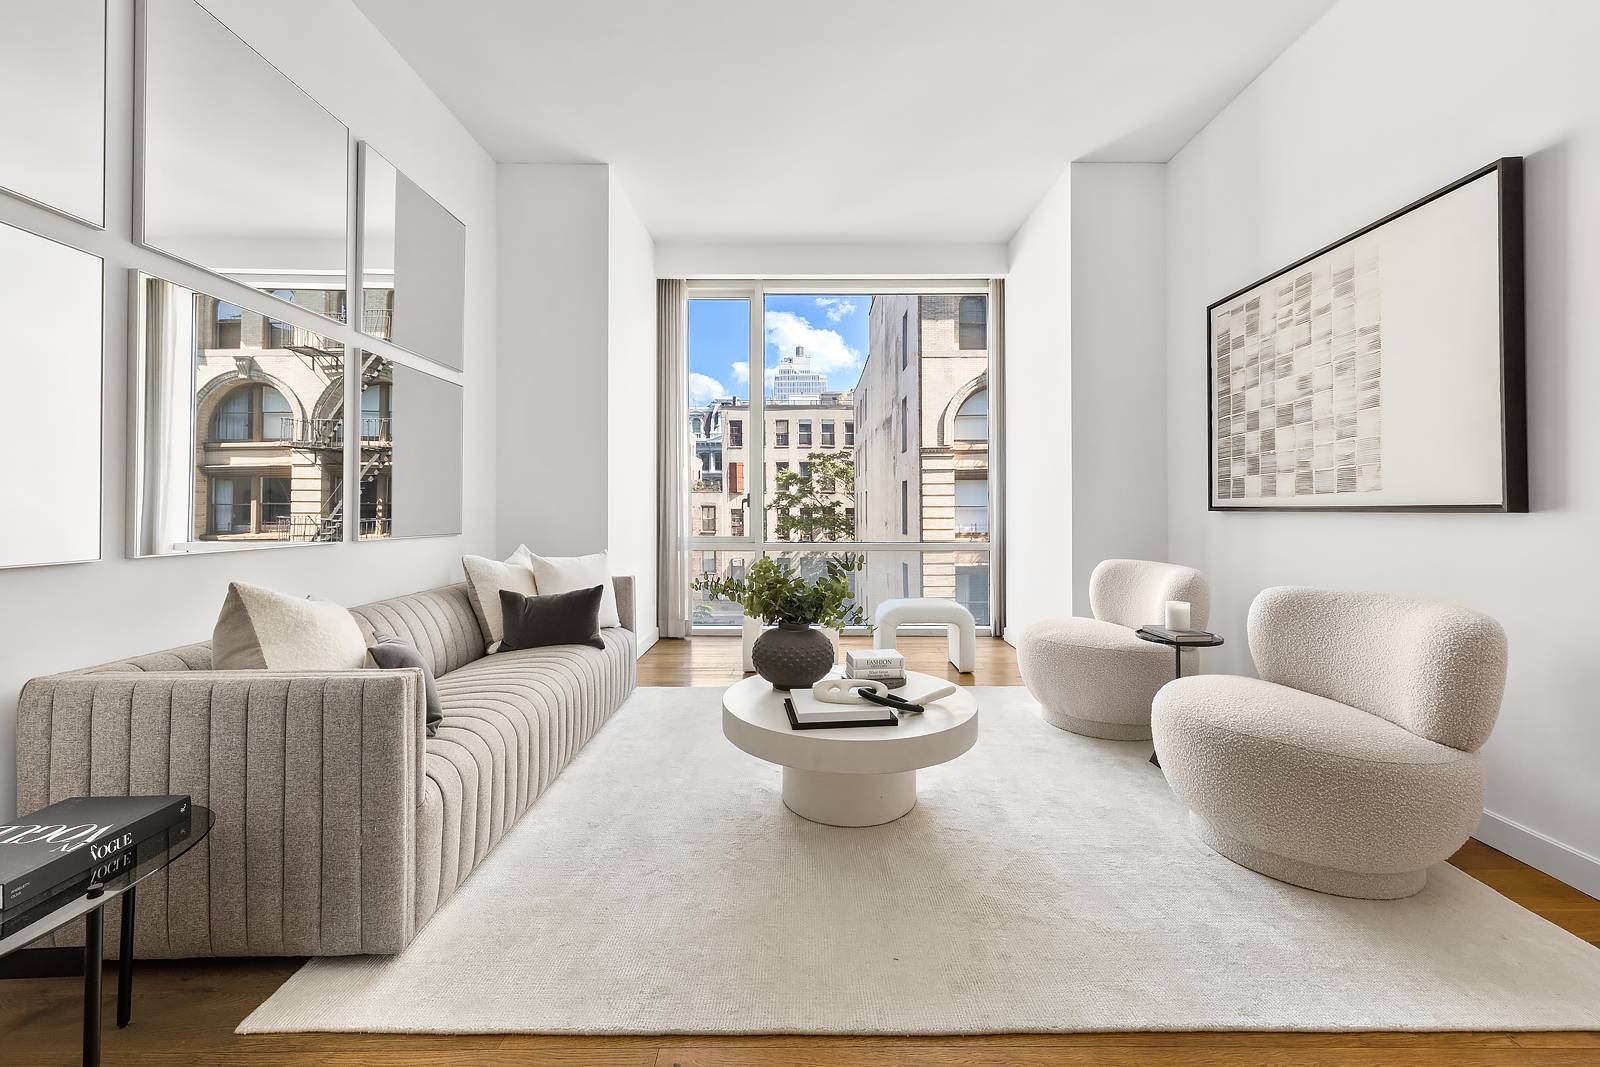 Welcome to the most desirable 2 bedroom 2 bath layout in the stunning Soho Mews Condominium, designed by the acclaimed Gwathmey Siegel architects, in a prime Soho location, with outstanding ...